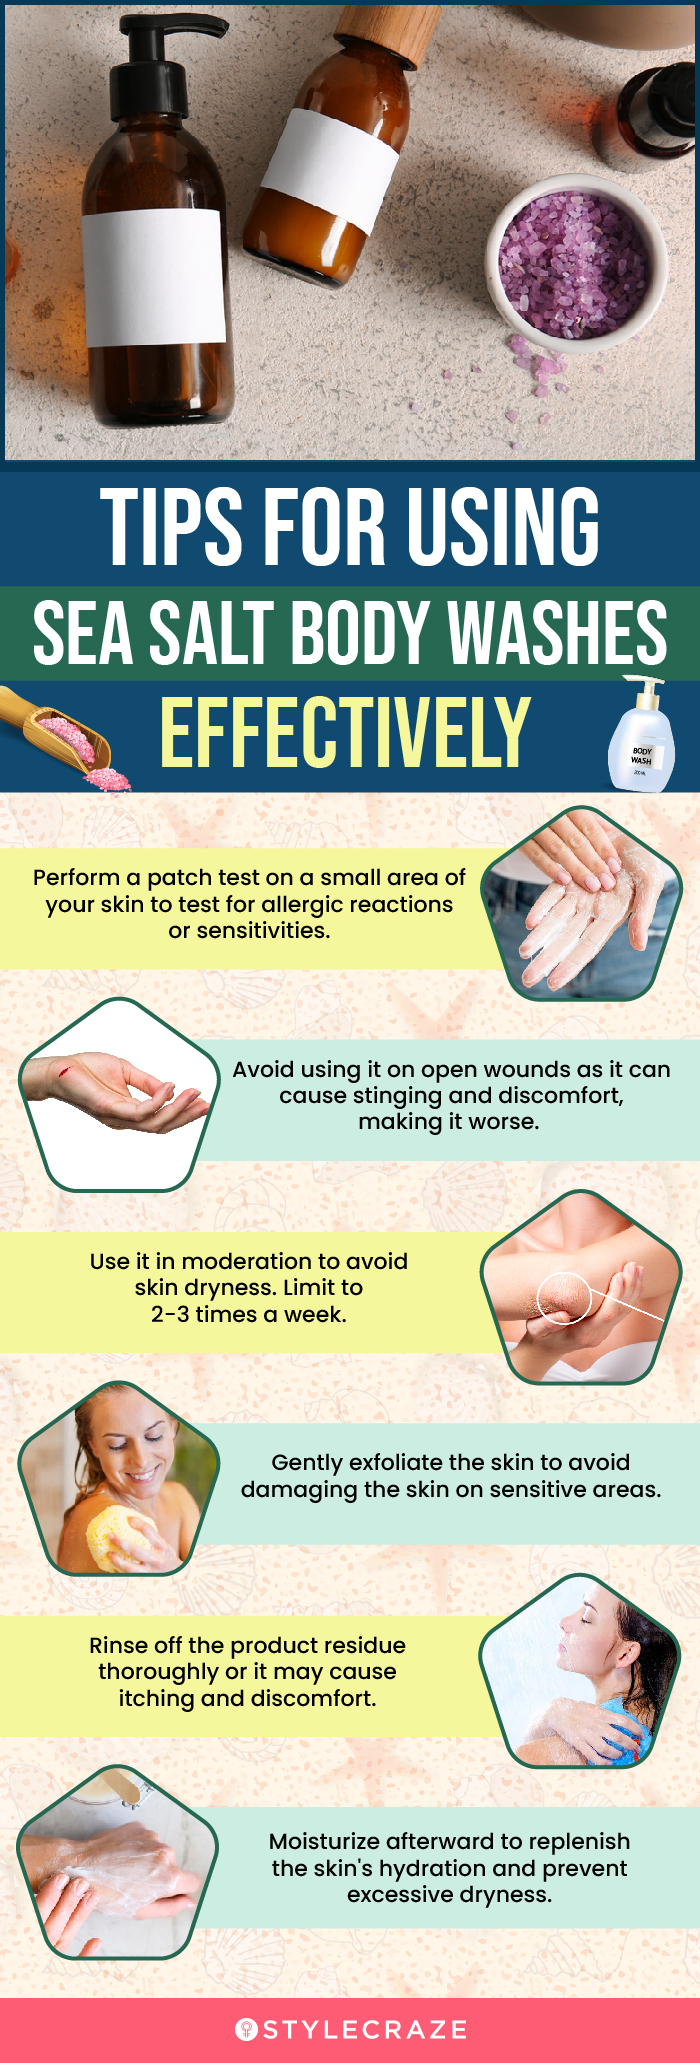 Tips For Using Sea Salt Body Washes Effectively (infographic)